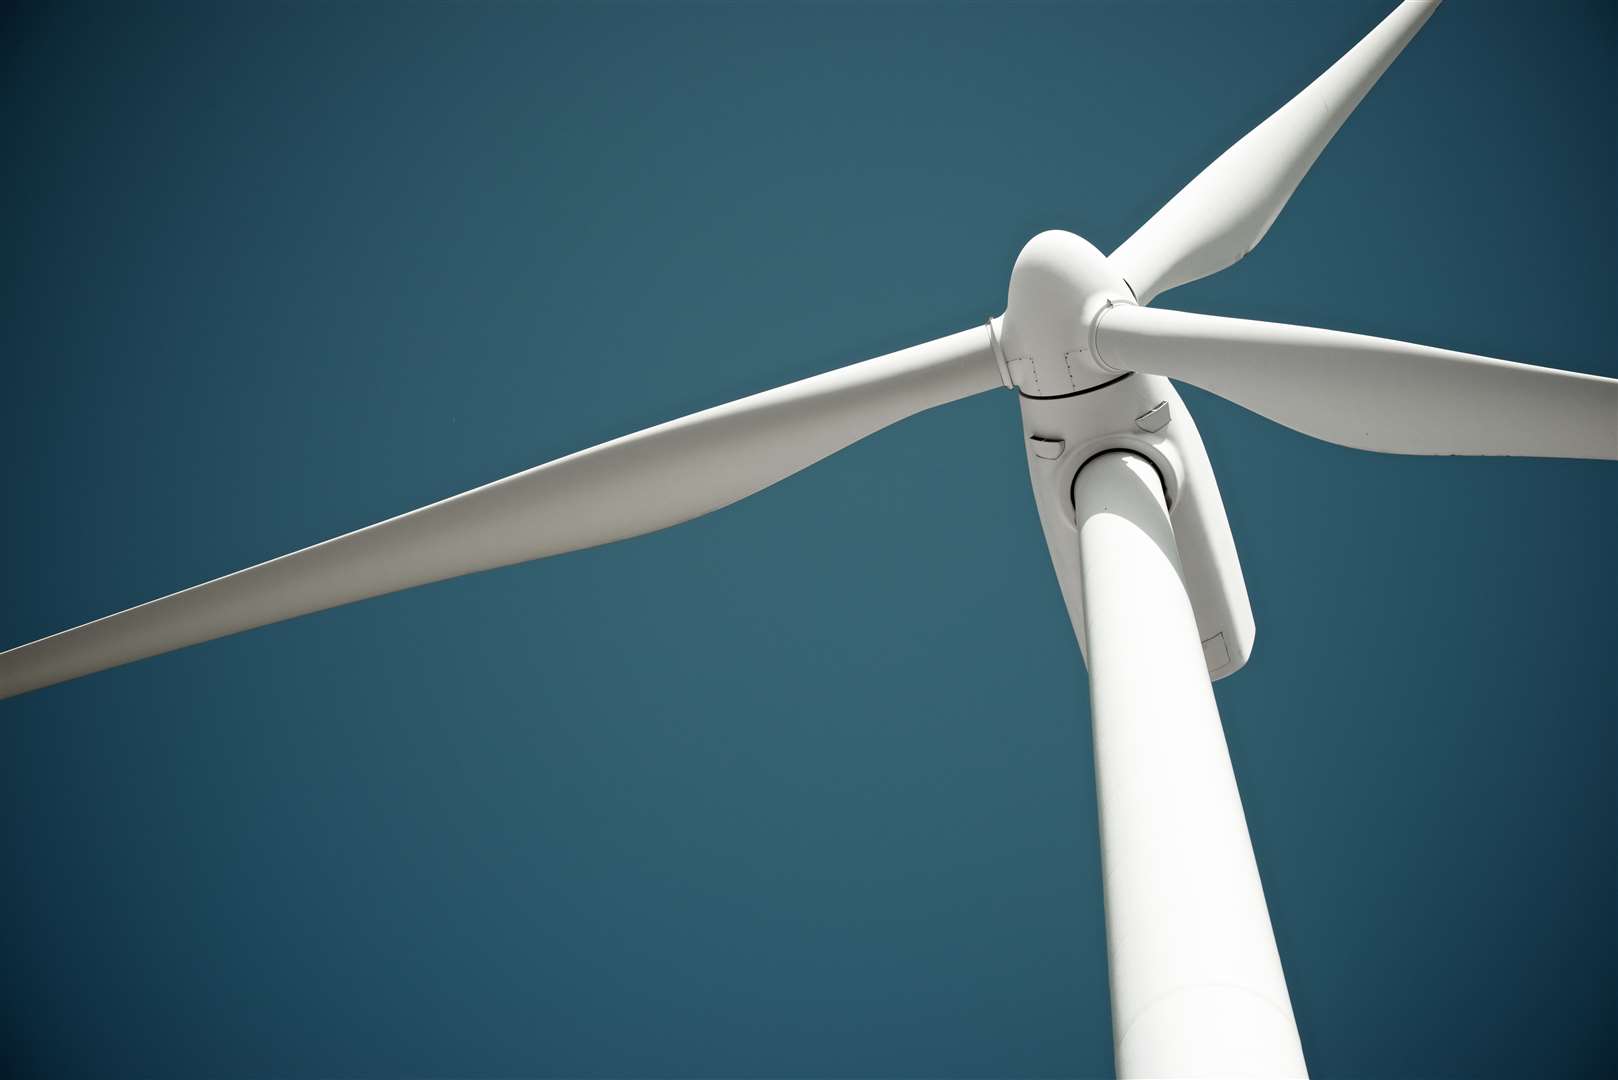 Chleansaid Wind Farm is to be built on a site on Dalnessie Estate, to the north-east of Lairg.